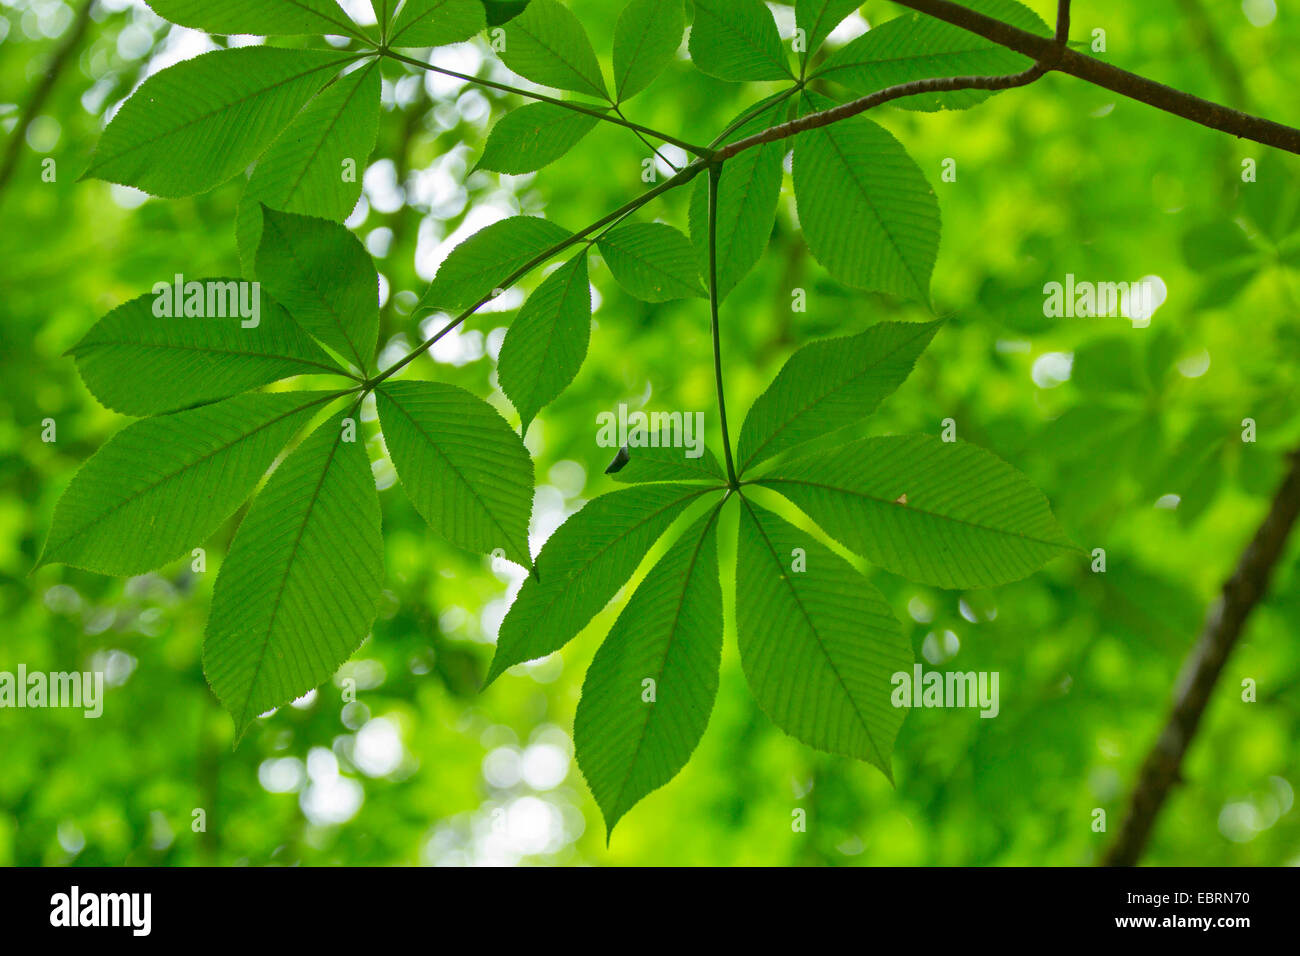 Buckeye Aesculus flava (jaune, Aesculus octandra), feuilles, USA, New York, parc national des Great Smoky Mountains Banque D'Images